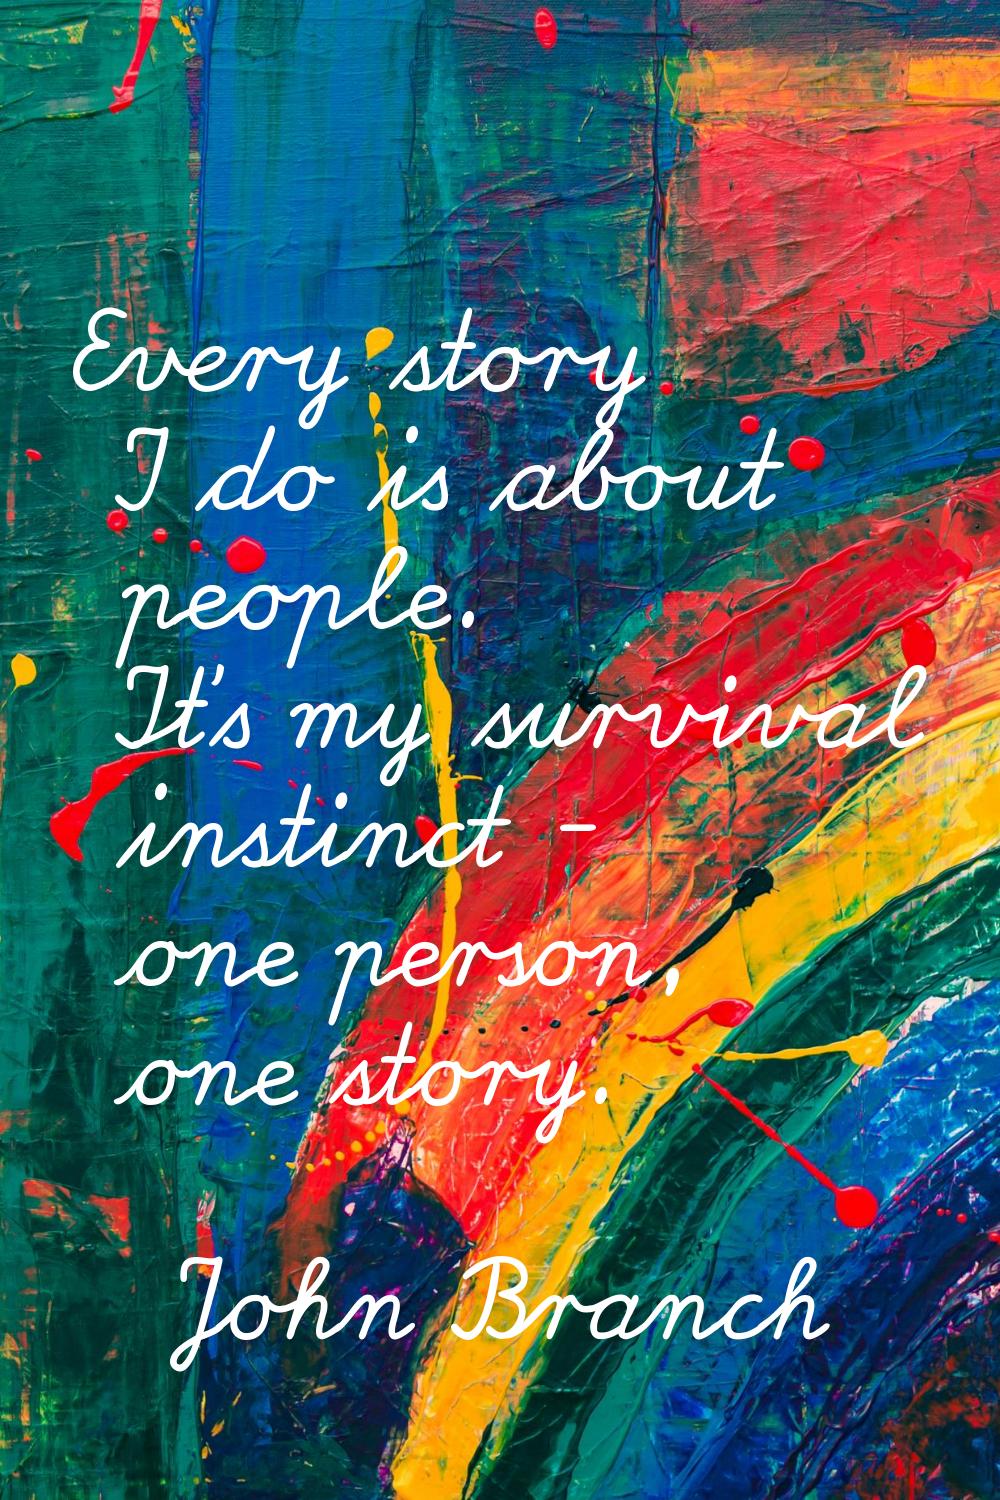 Every story I do is about people. It's my survival instinct - one person, one story.